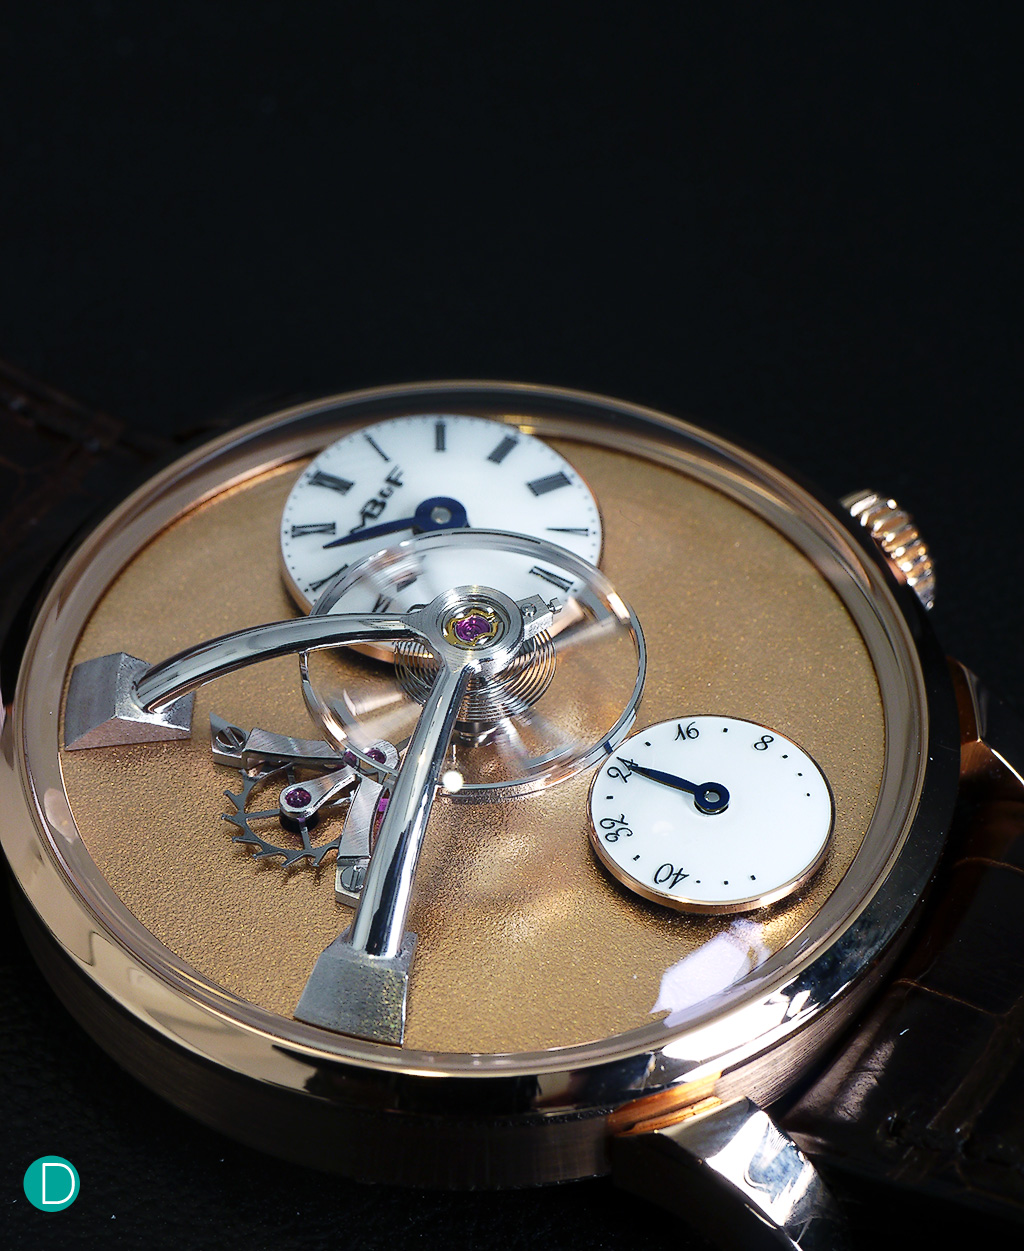 The MB&F LM101 Frost